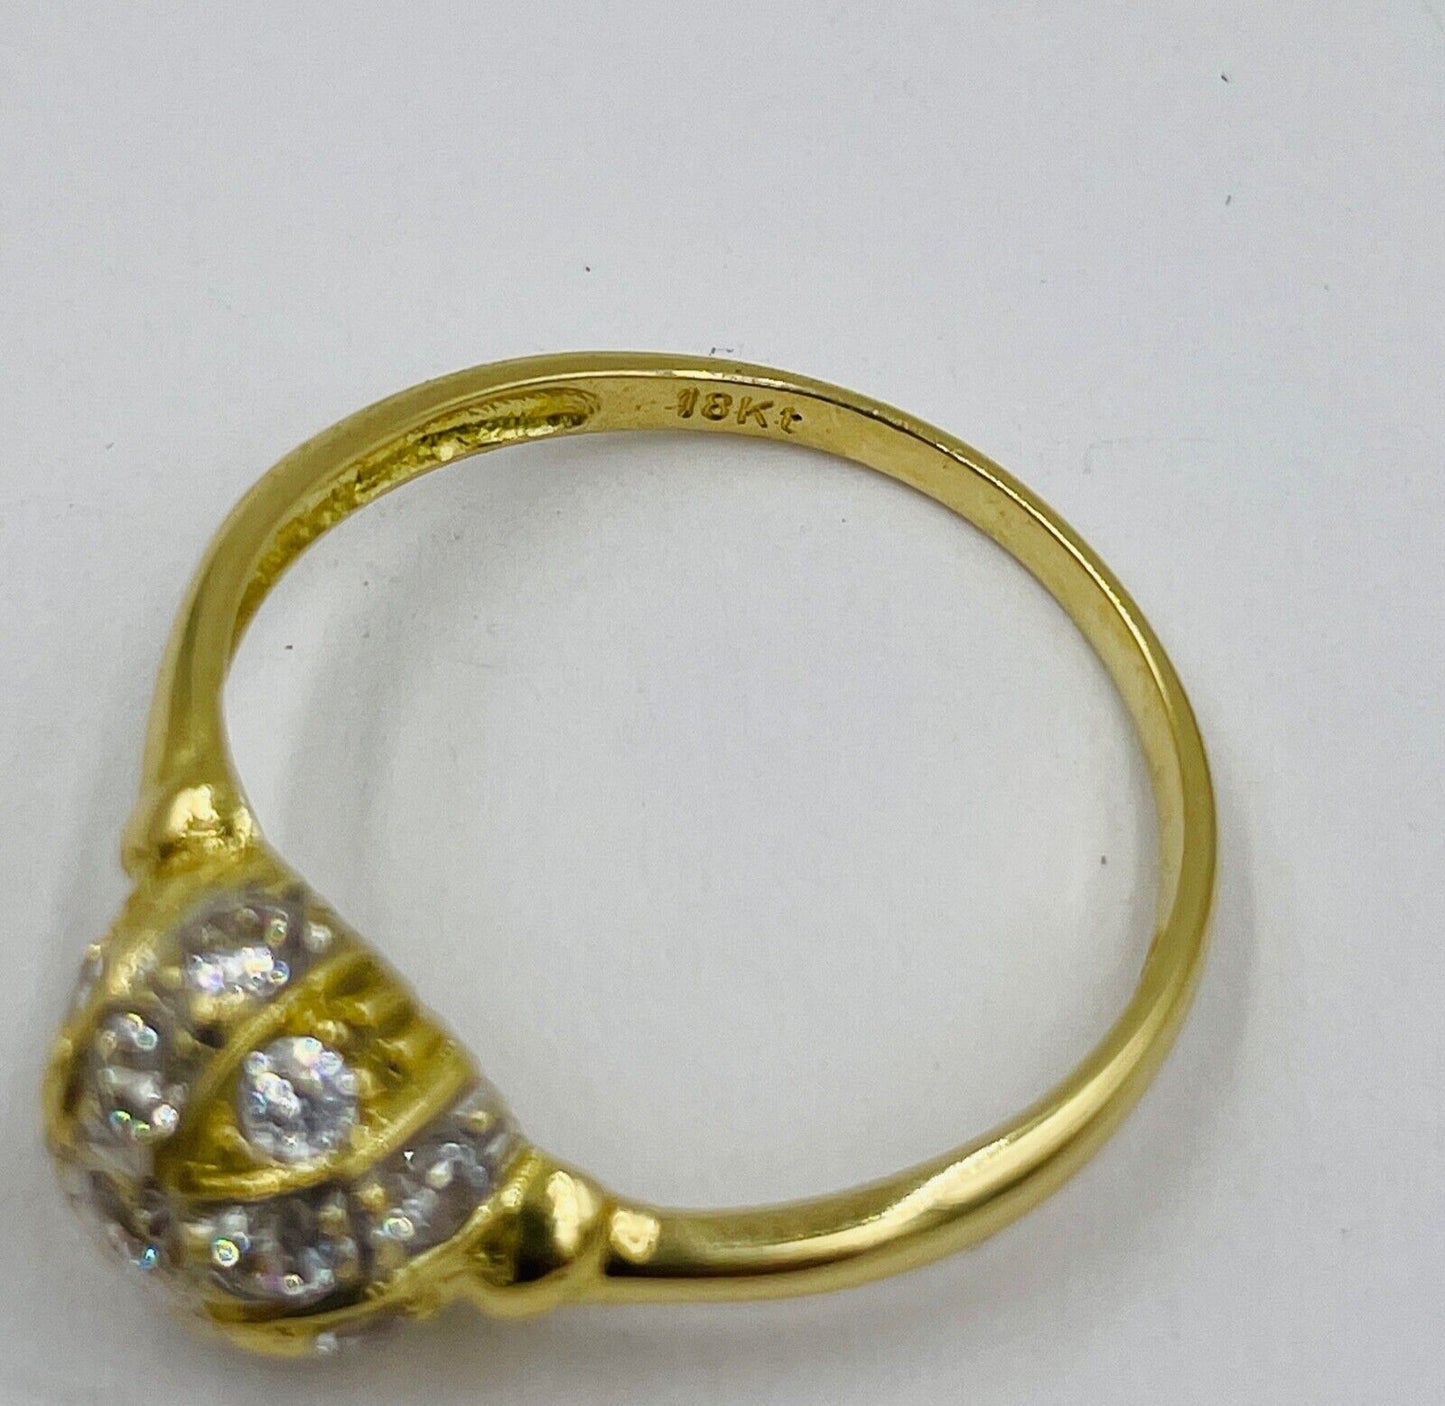 Vintage 18K yellow gold Cz dome Ring size 7